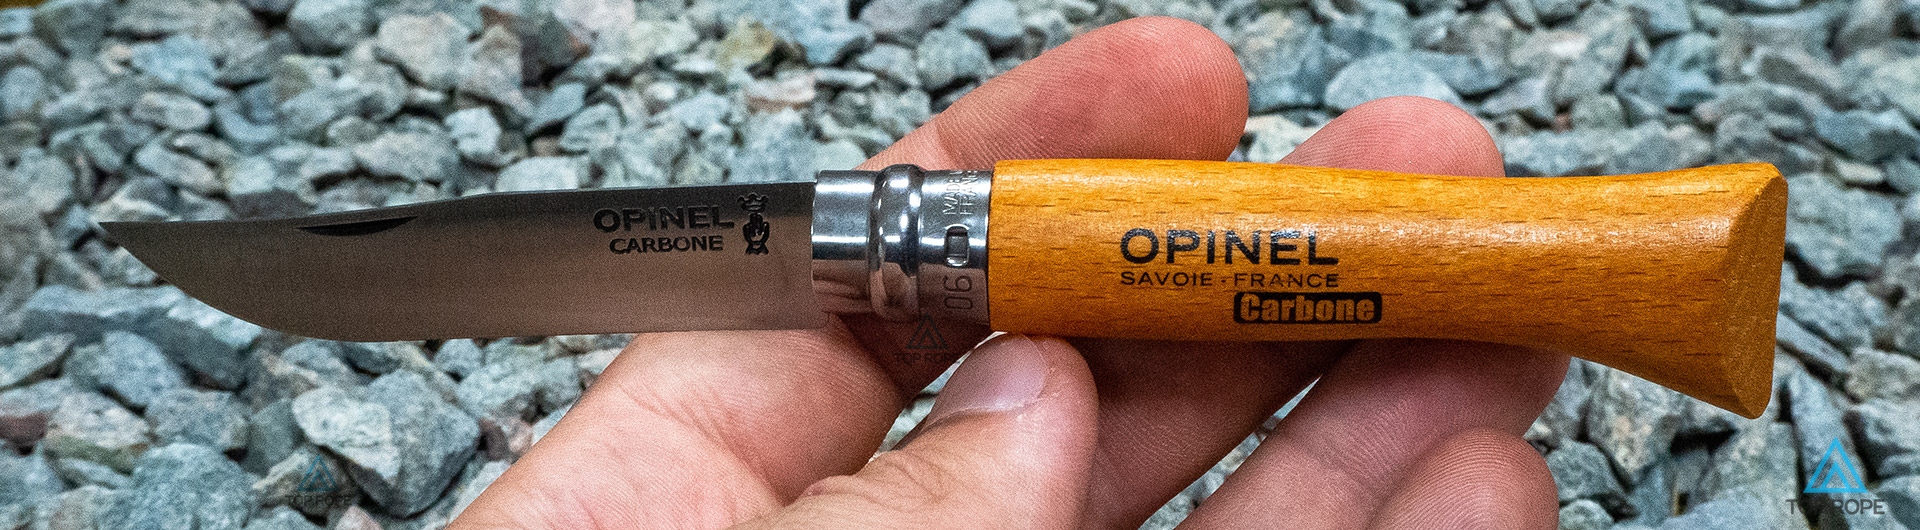 Opinel Carbon #6